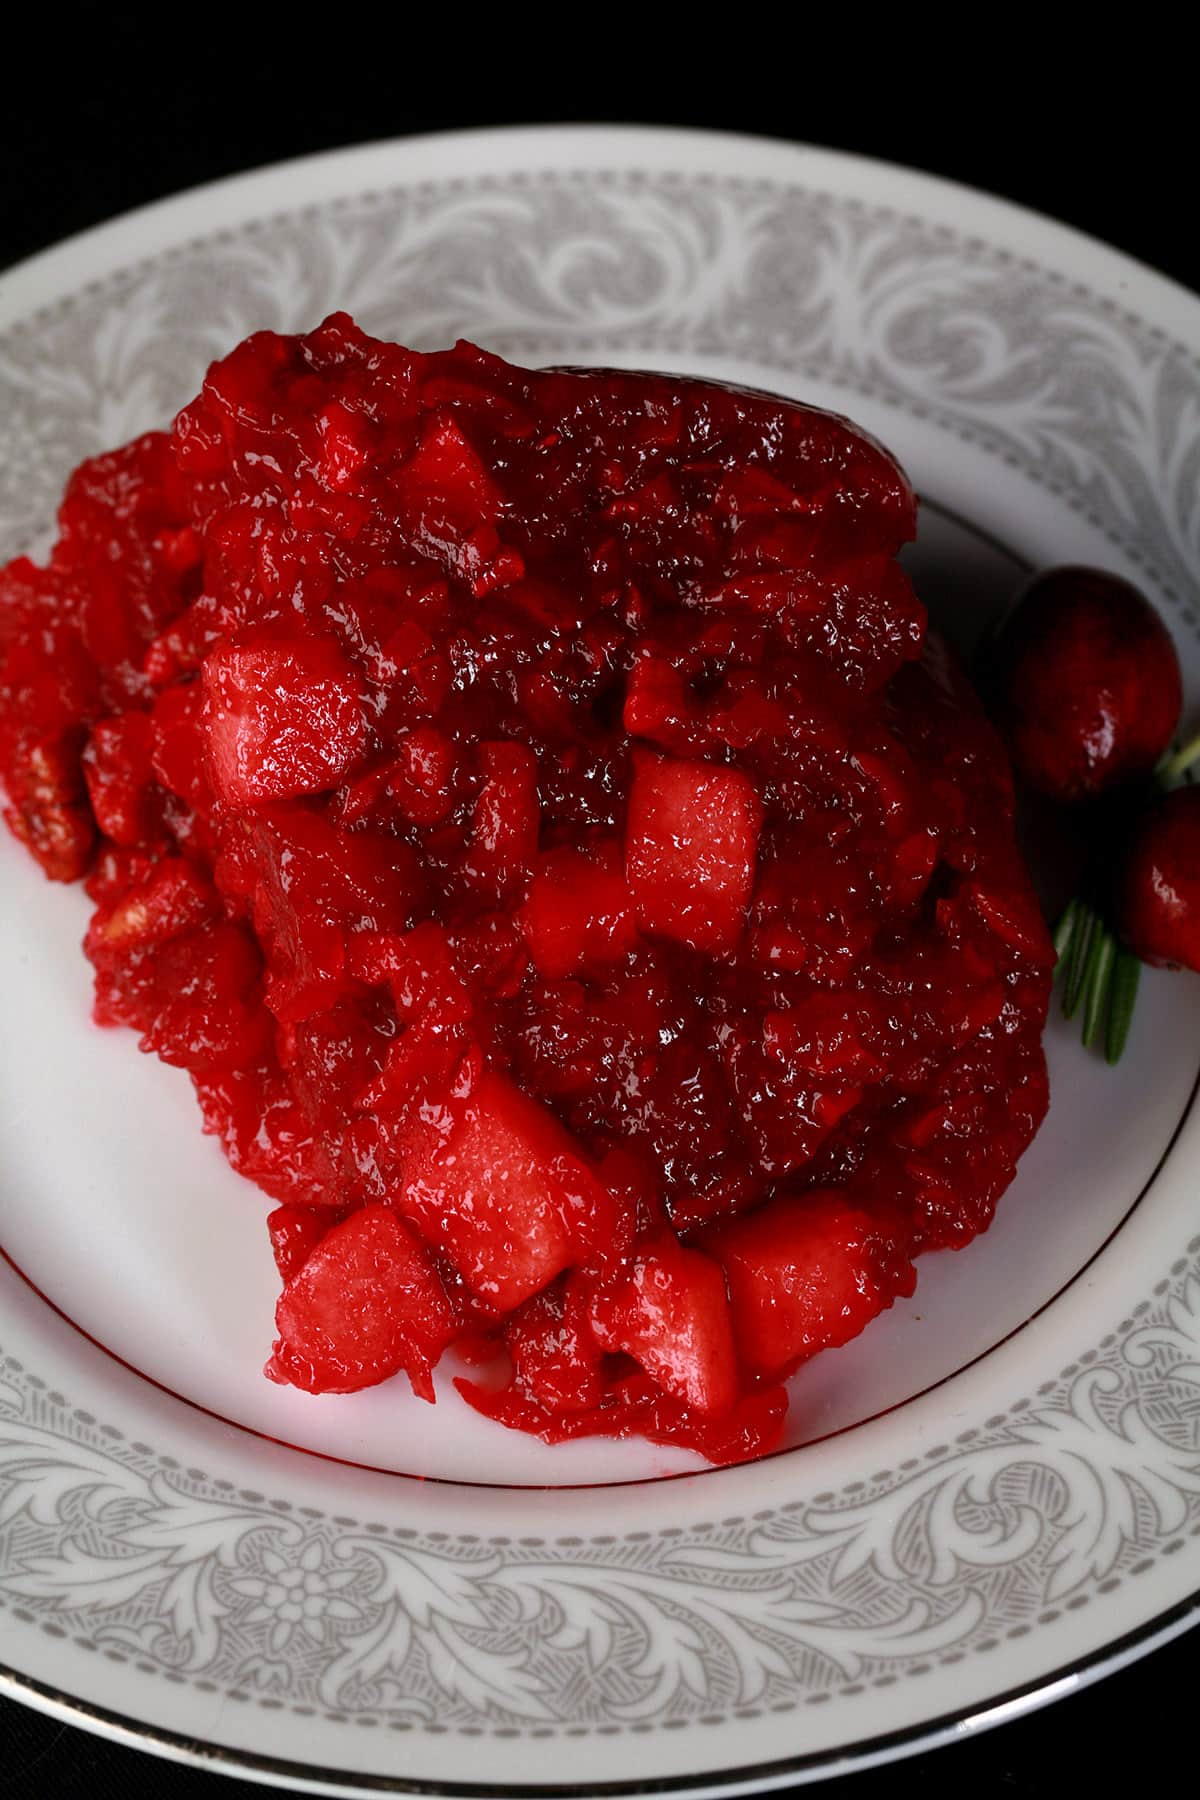 A serving of cranberry Jello salad on a plate.